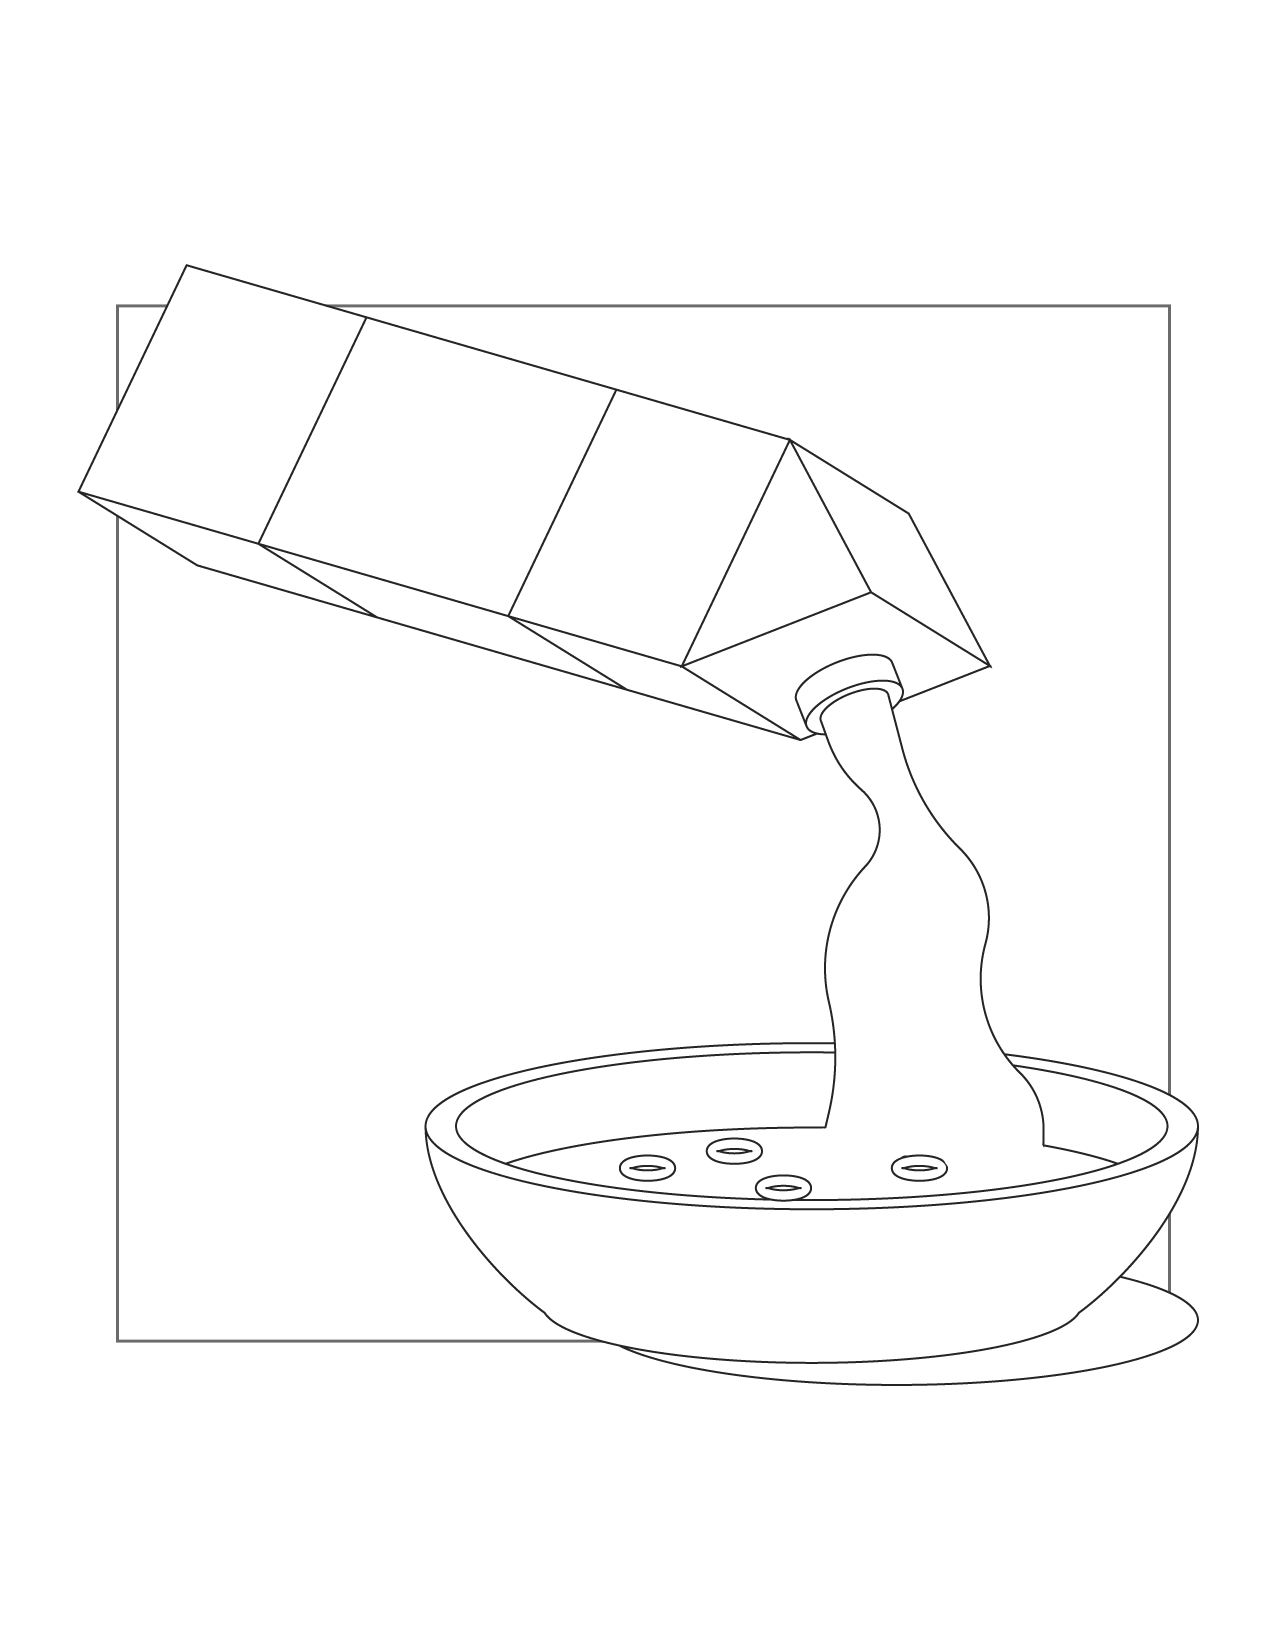 Pouring Milk Into Cereal Coloring Page